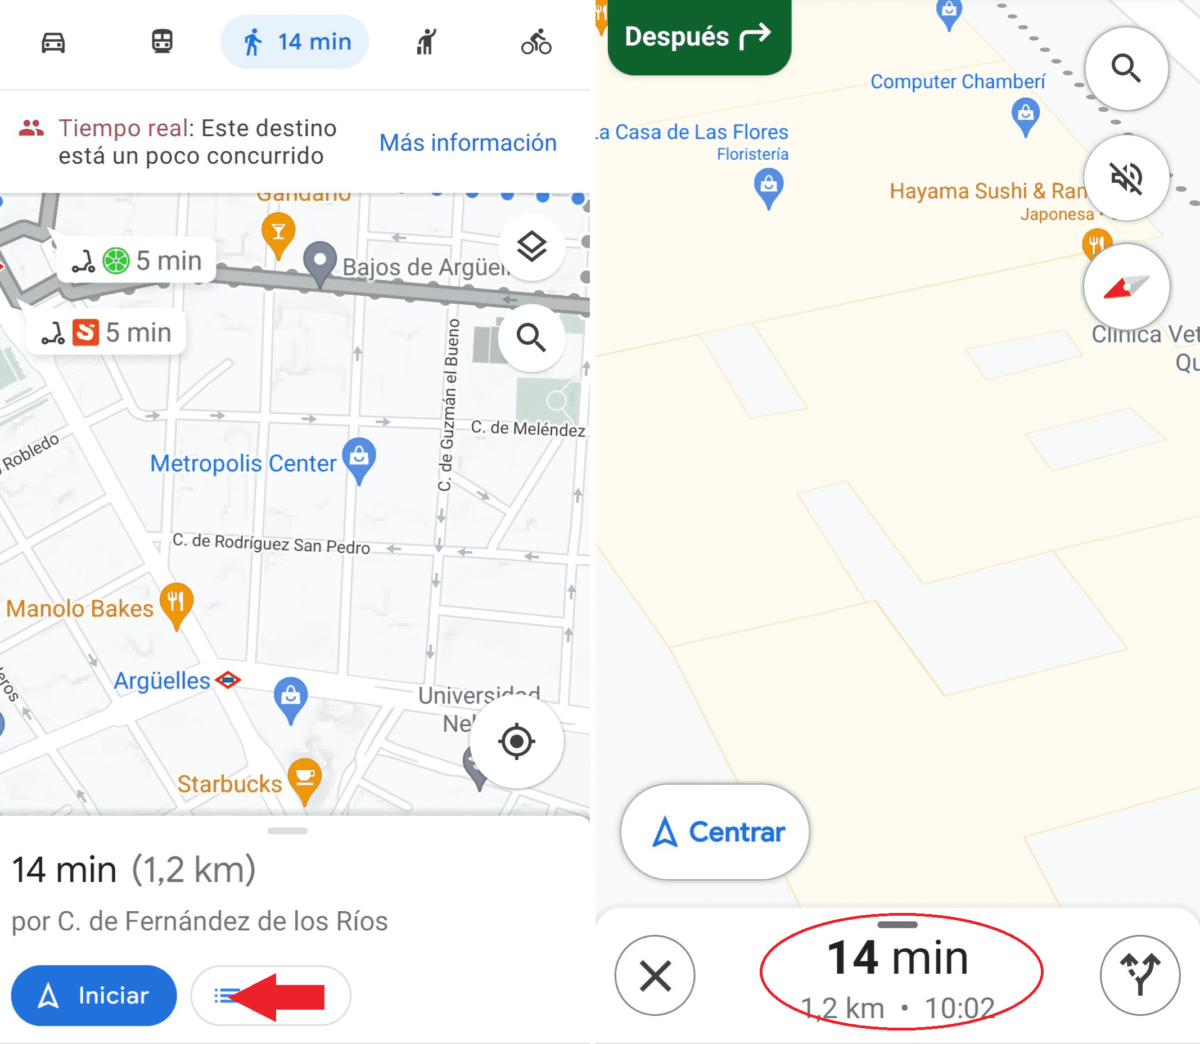 How to know the walking time on Google Maps